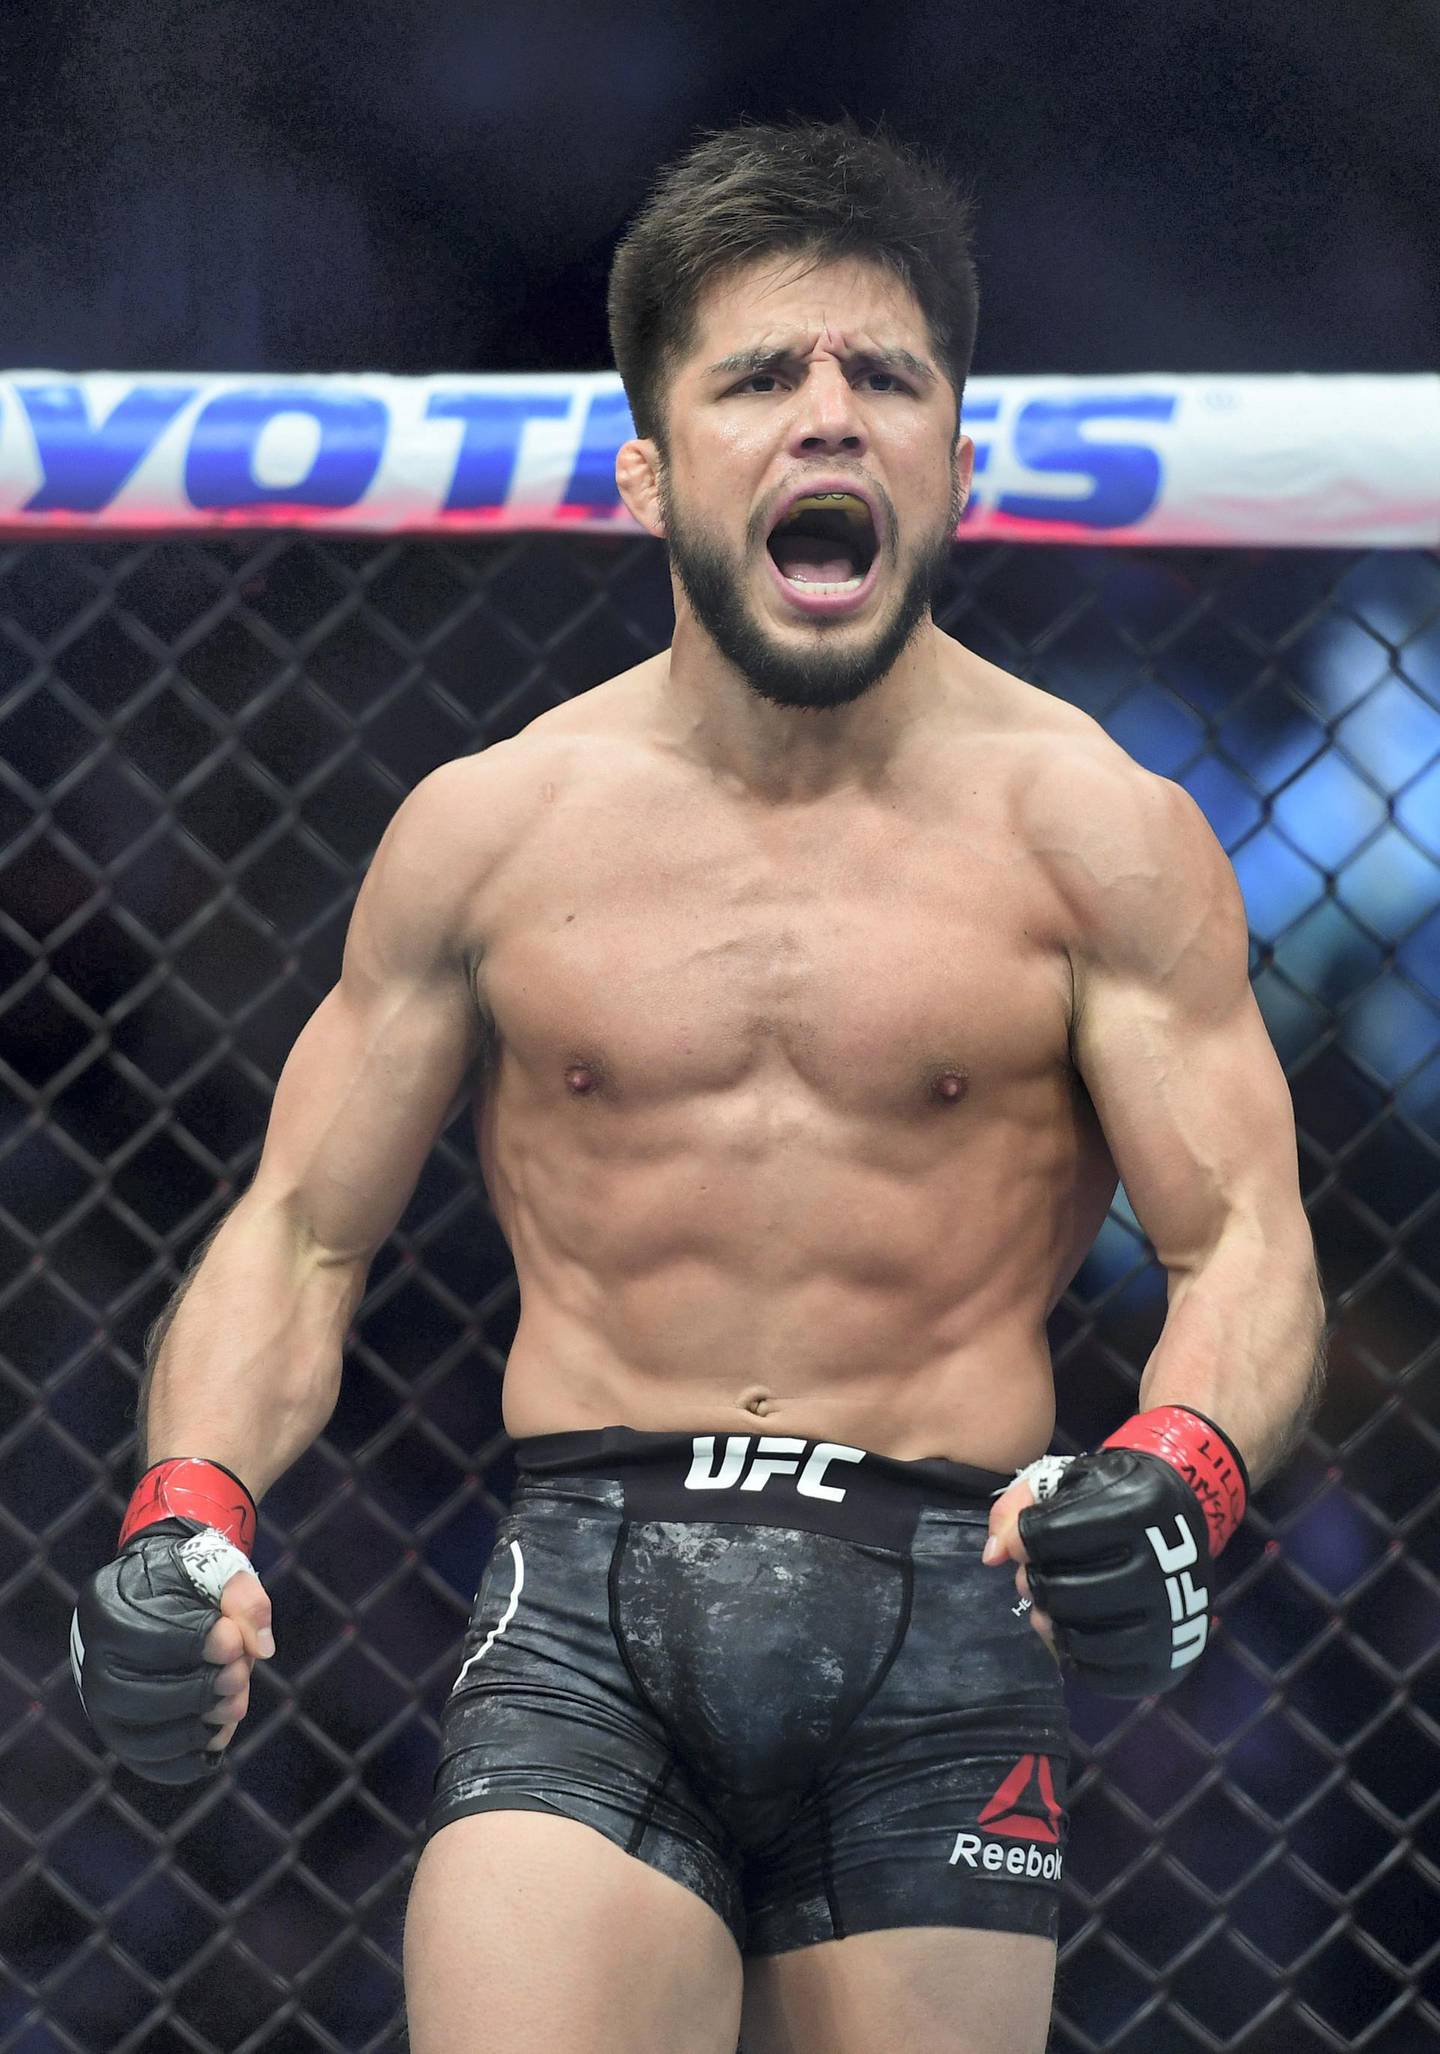 NEW YORK, NEW YORK - JANUARY 19: Henry Cejudo reacts after defeating TJ Dillashaw in the first round during their UFC Flyweight title match at UFC Fight Night at Barclays Center on January 19, 2019 in New York City.   Sarah Stier/Getty Images/AFP